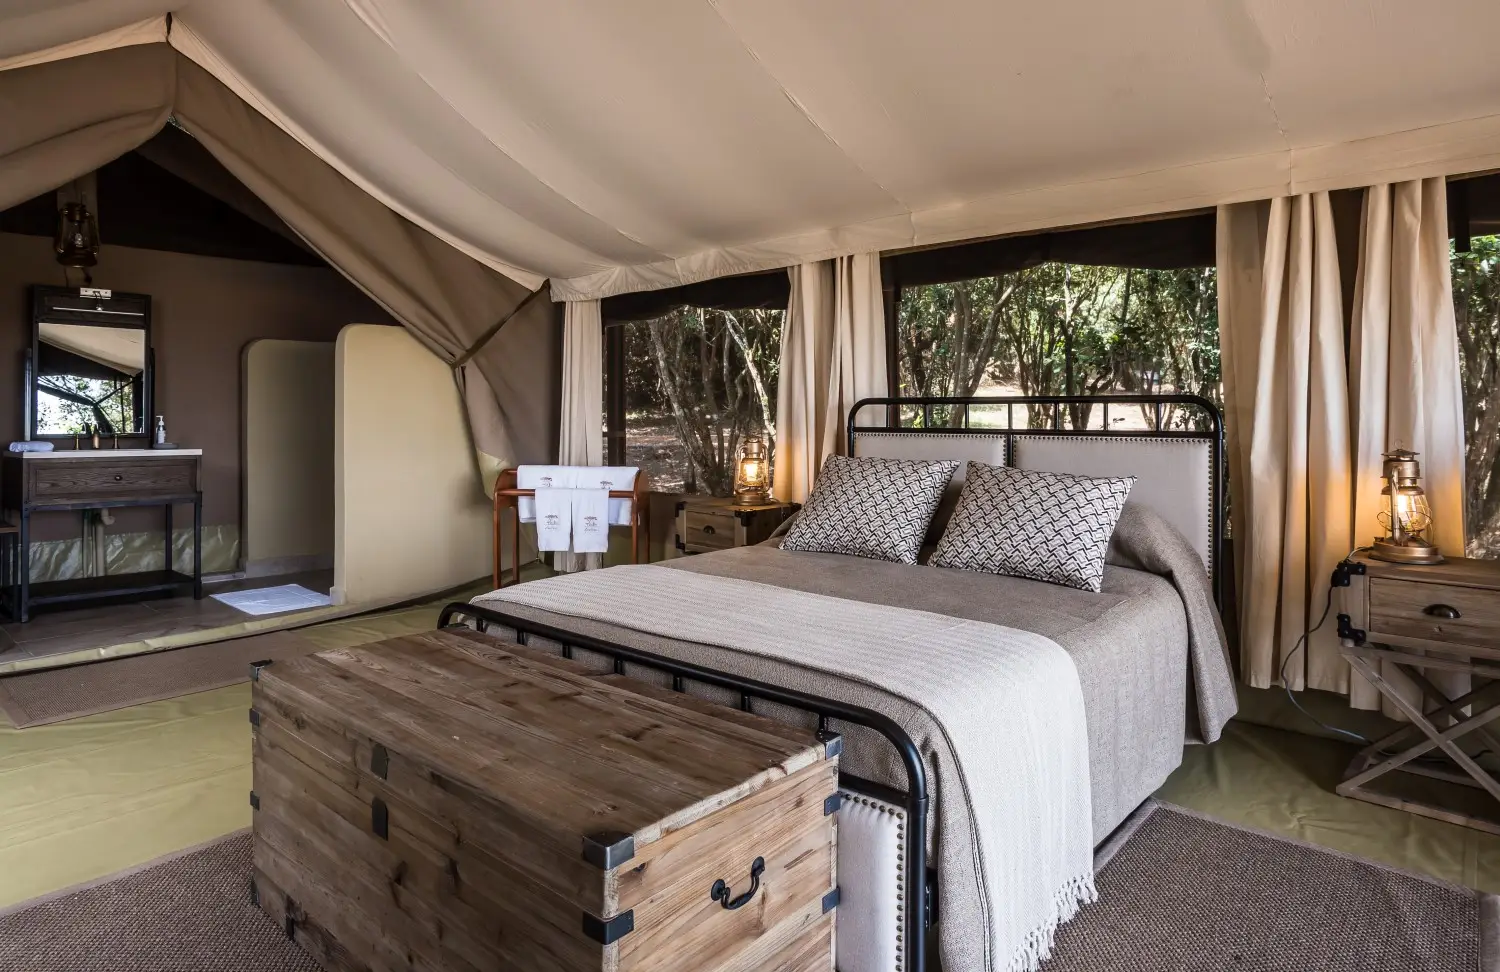 Kenya holidays all inclusive - Transport, meals and accommodation. Entim Mara’s luxury tented camp